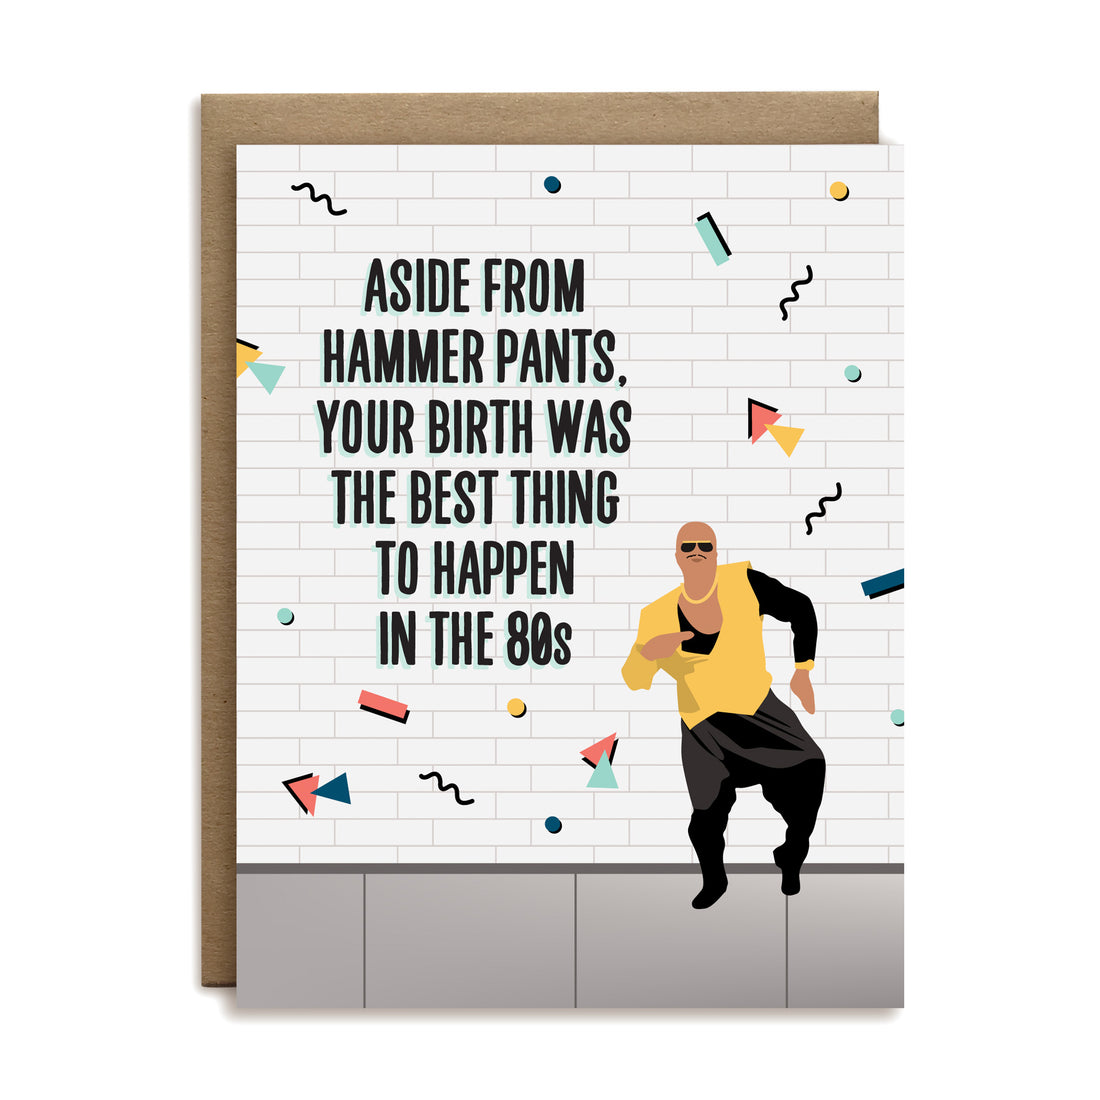 Aside from hammer pants, your birth was the best thing to happen in the 80s birthday greeting card by I’ll Know It When I See It